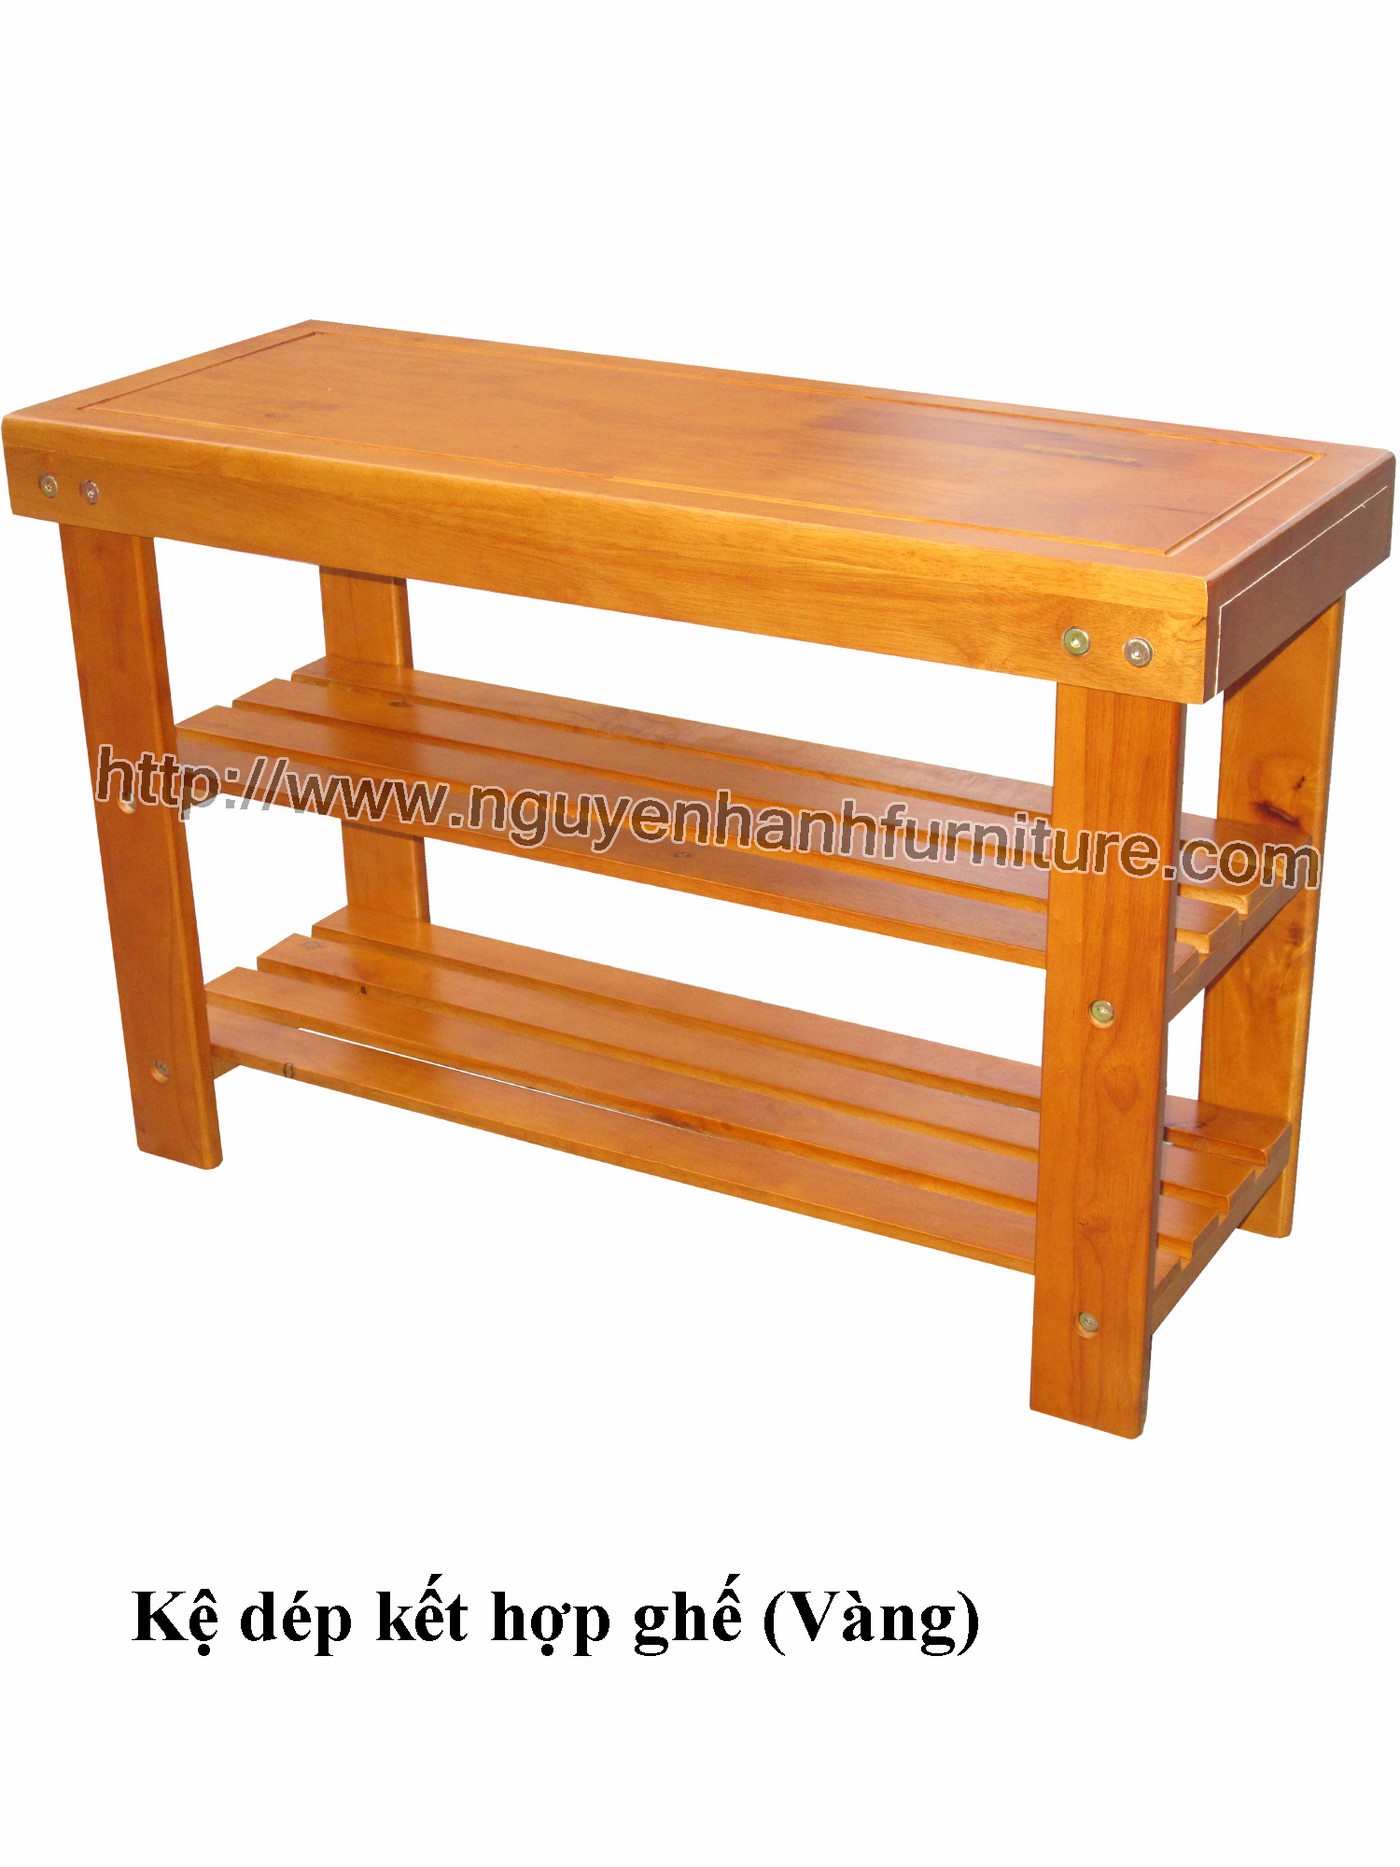 Name product: Shoe shelf with sitting place (Yellow)  - Dimensions: 70 x 27 x 45 cm - Description: Wood natural rubber